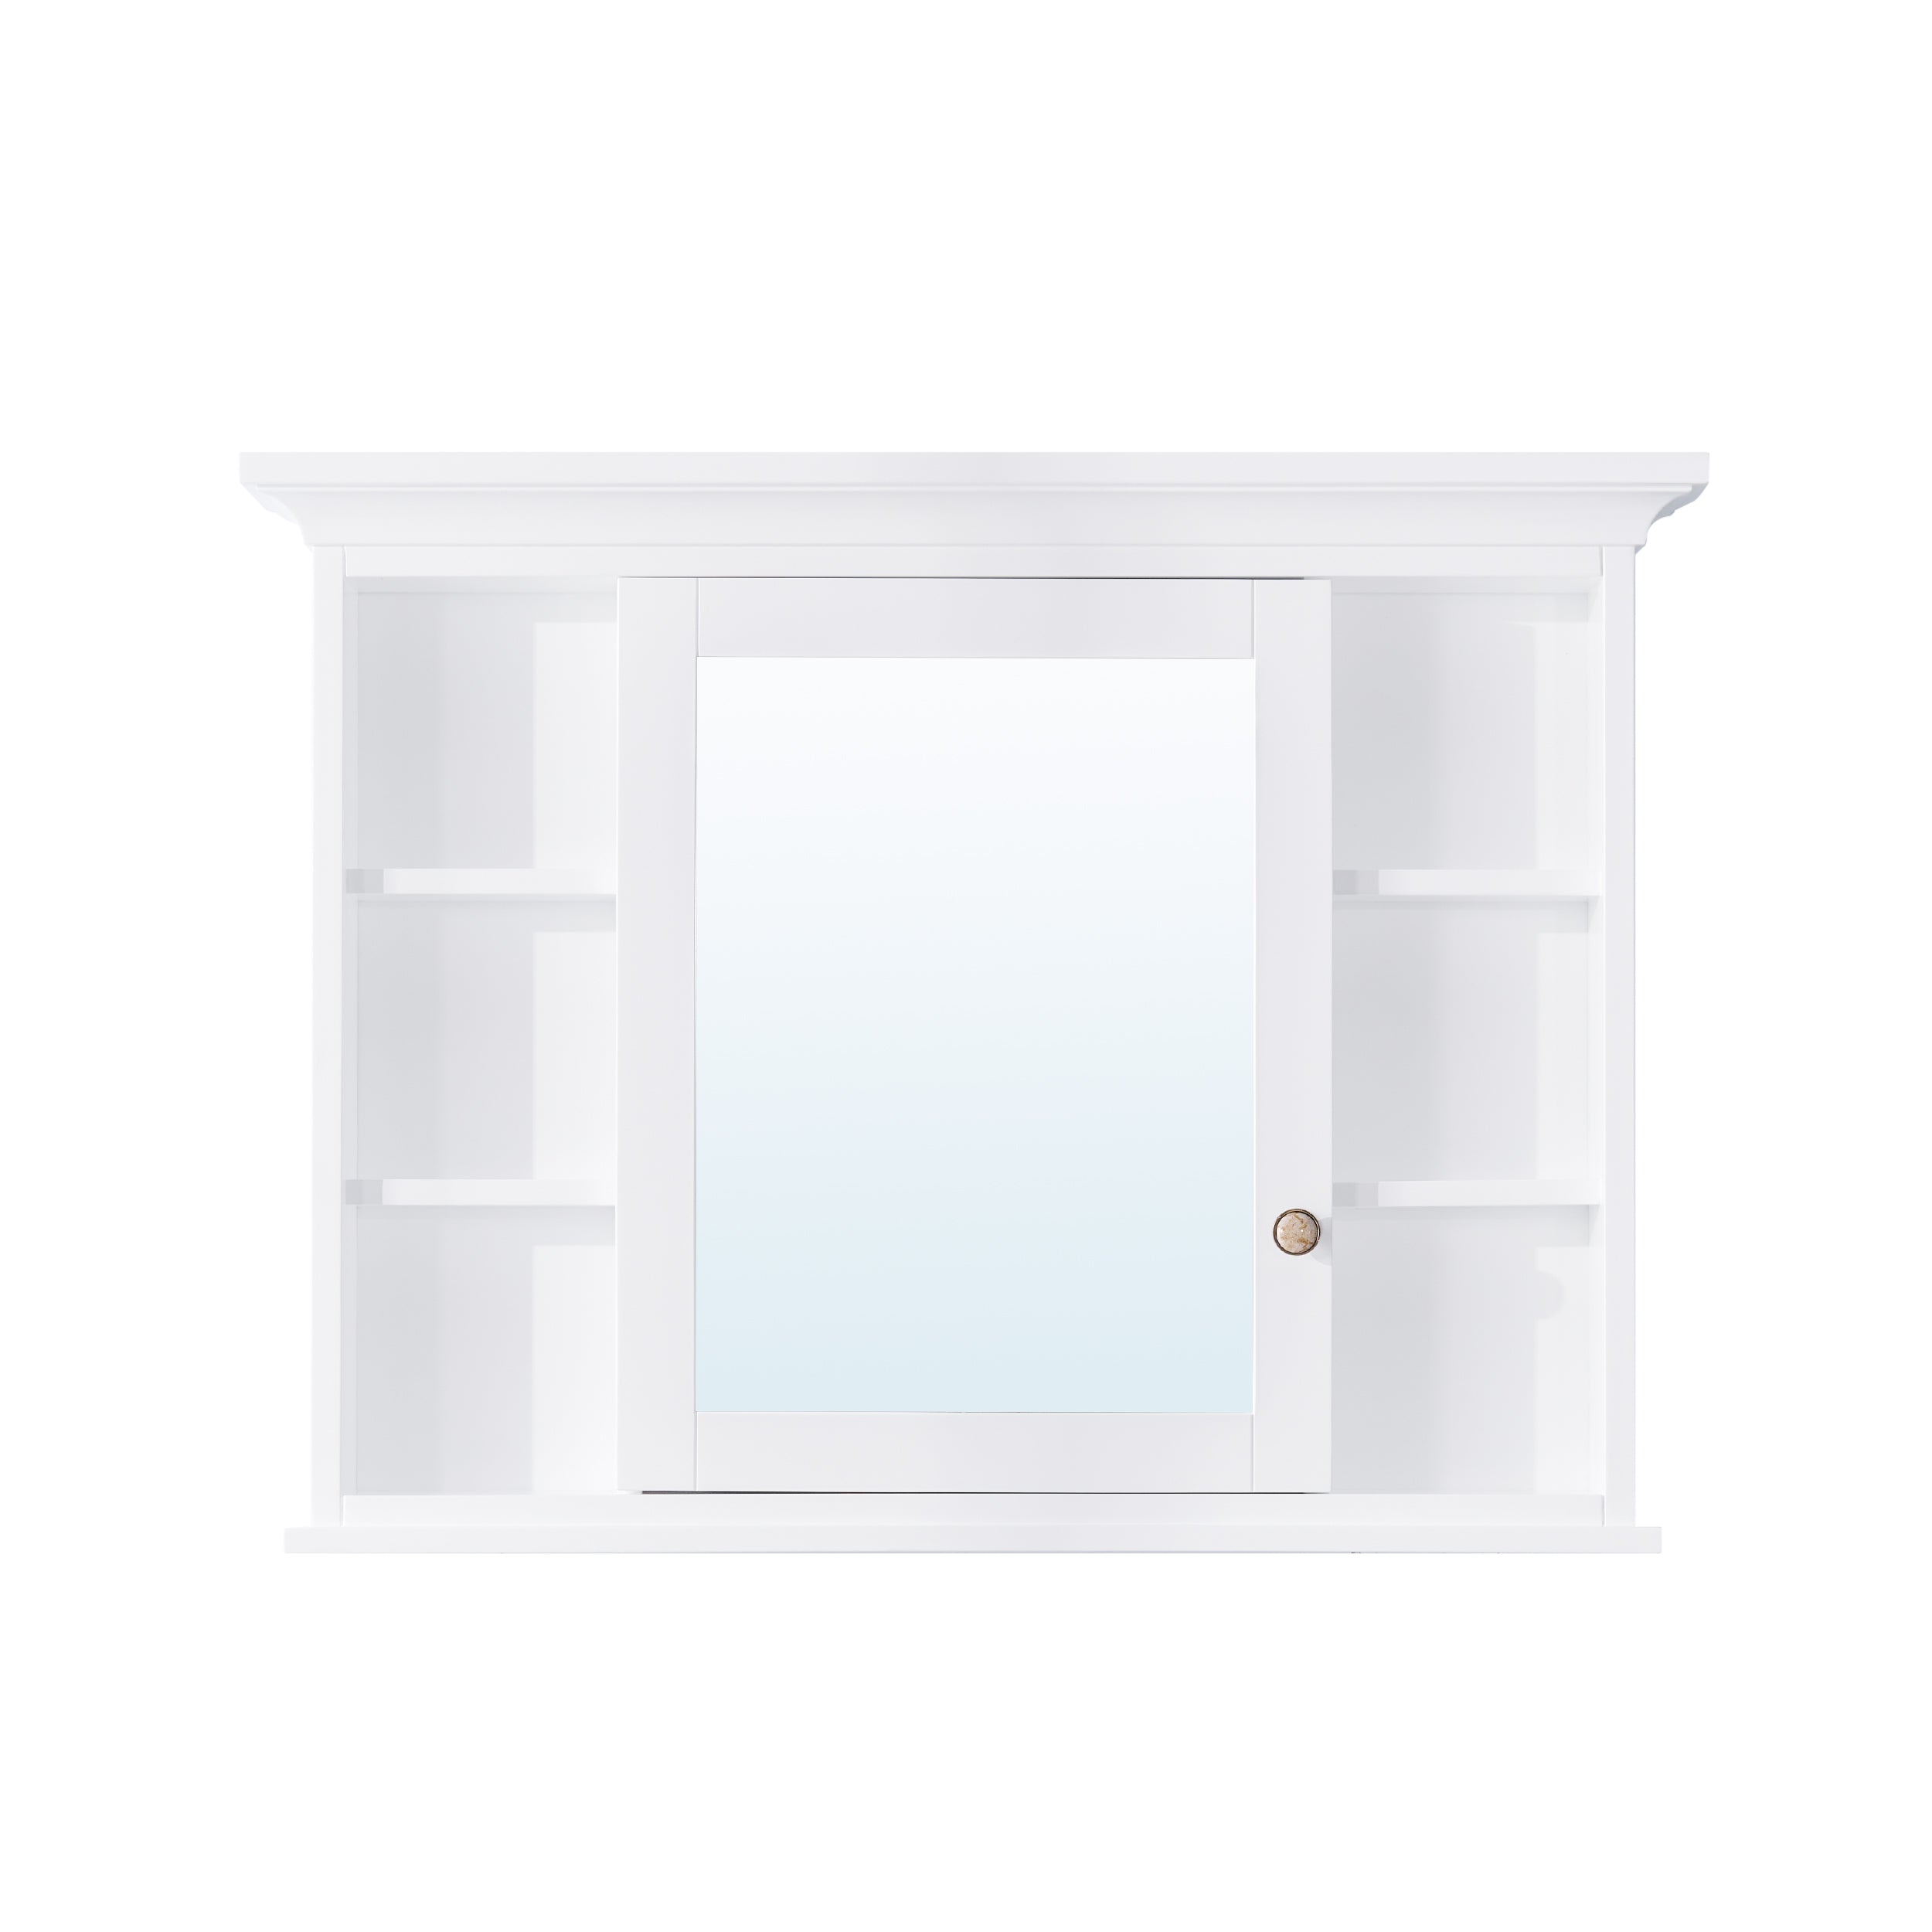 40 in.W x 30 in.H Surface-Mount Bathroom Medicine Cabinet with Mirror in White